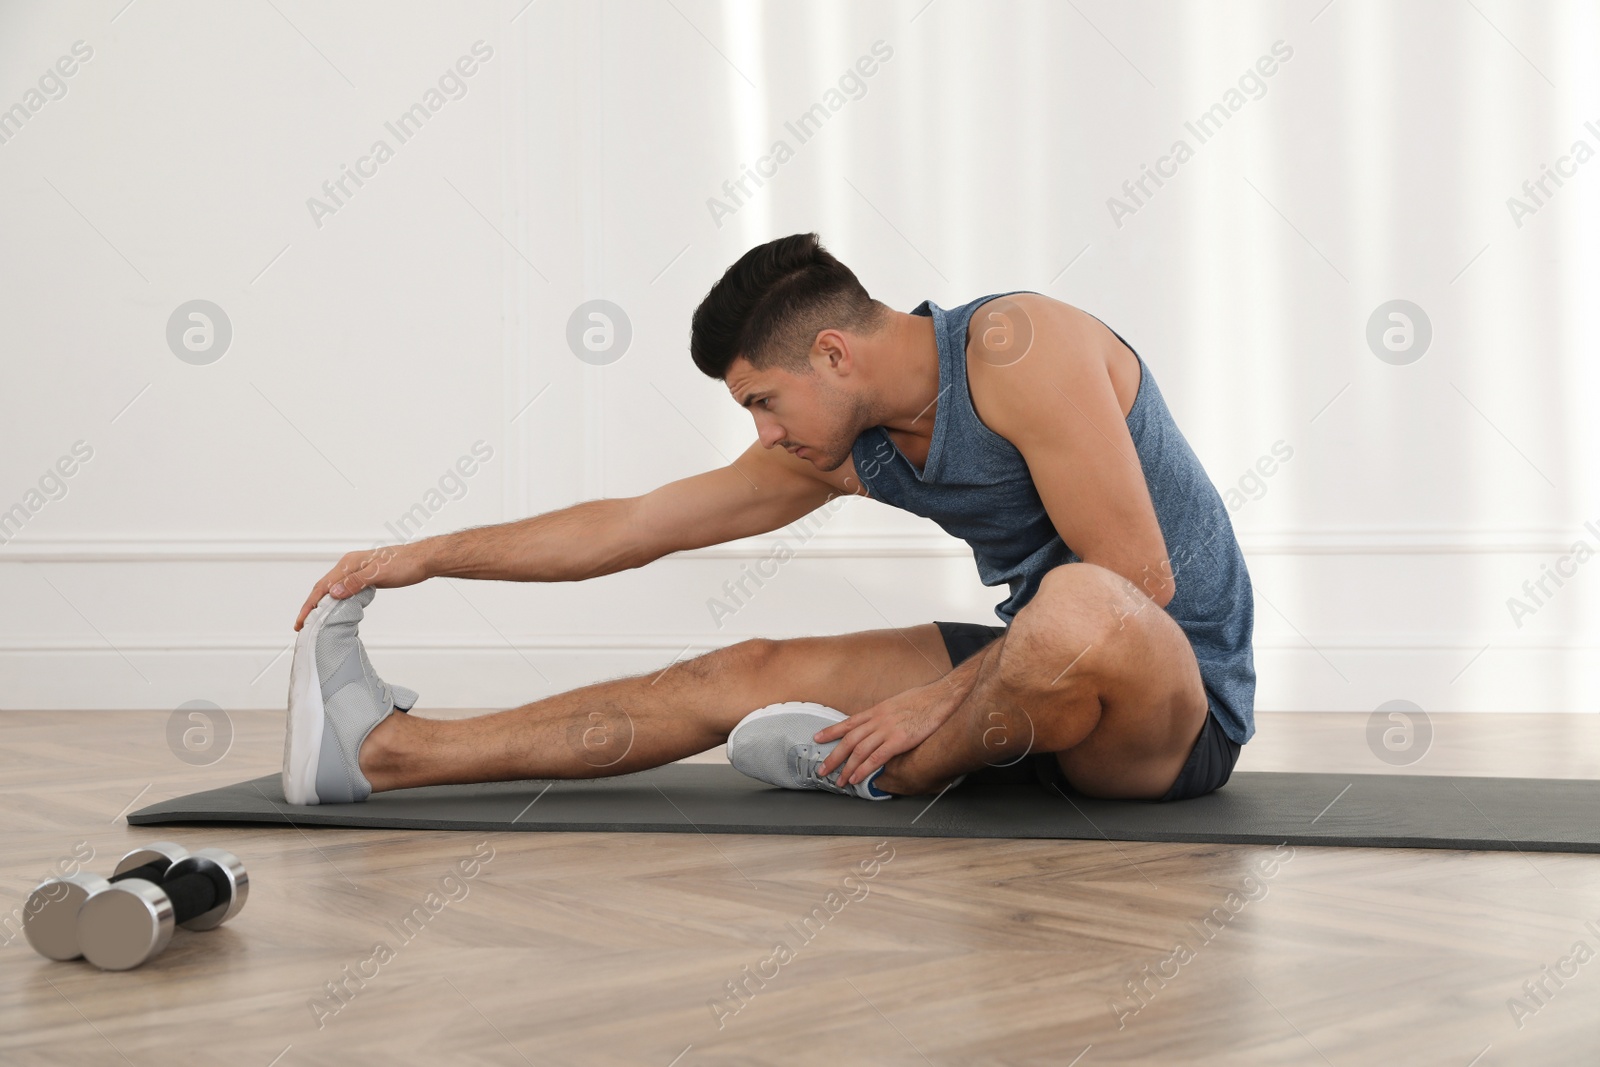 Photo of Handsome man stretching on yoga mat indoors